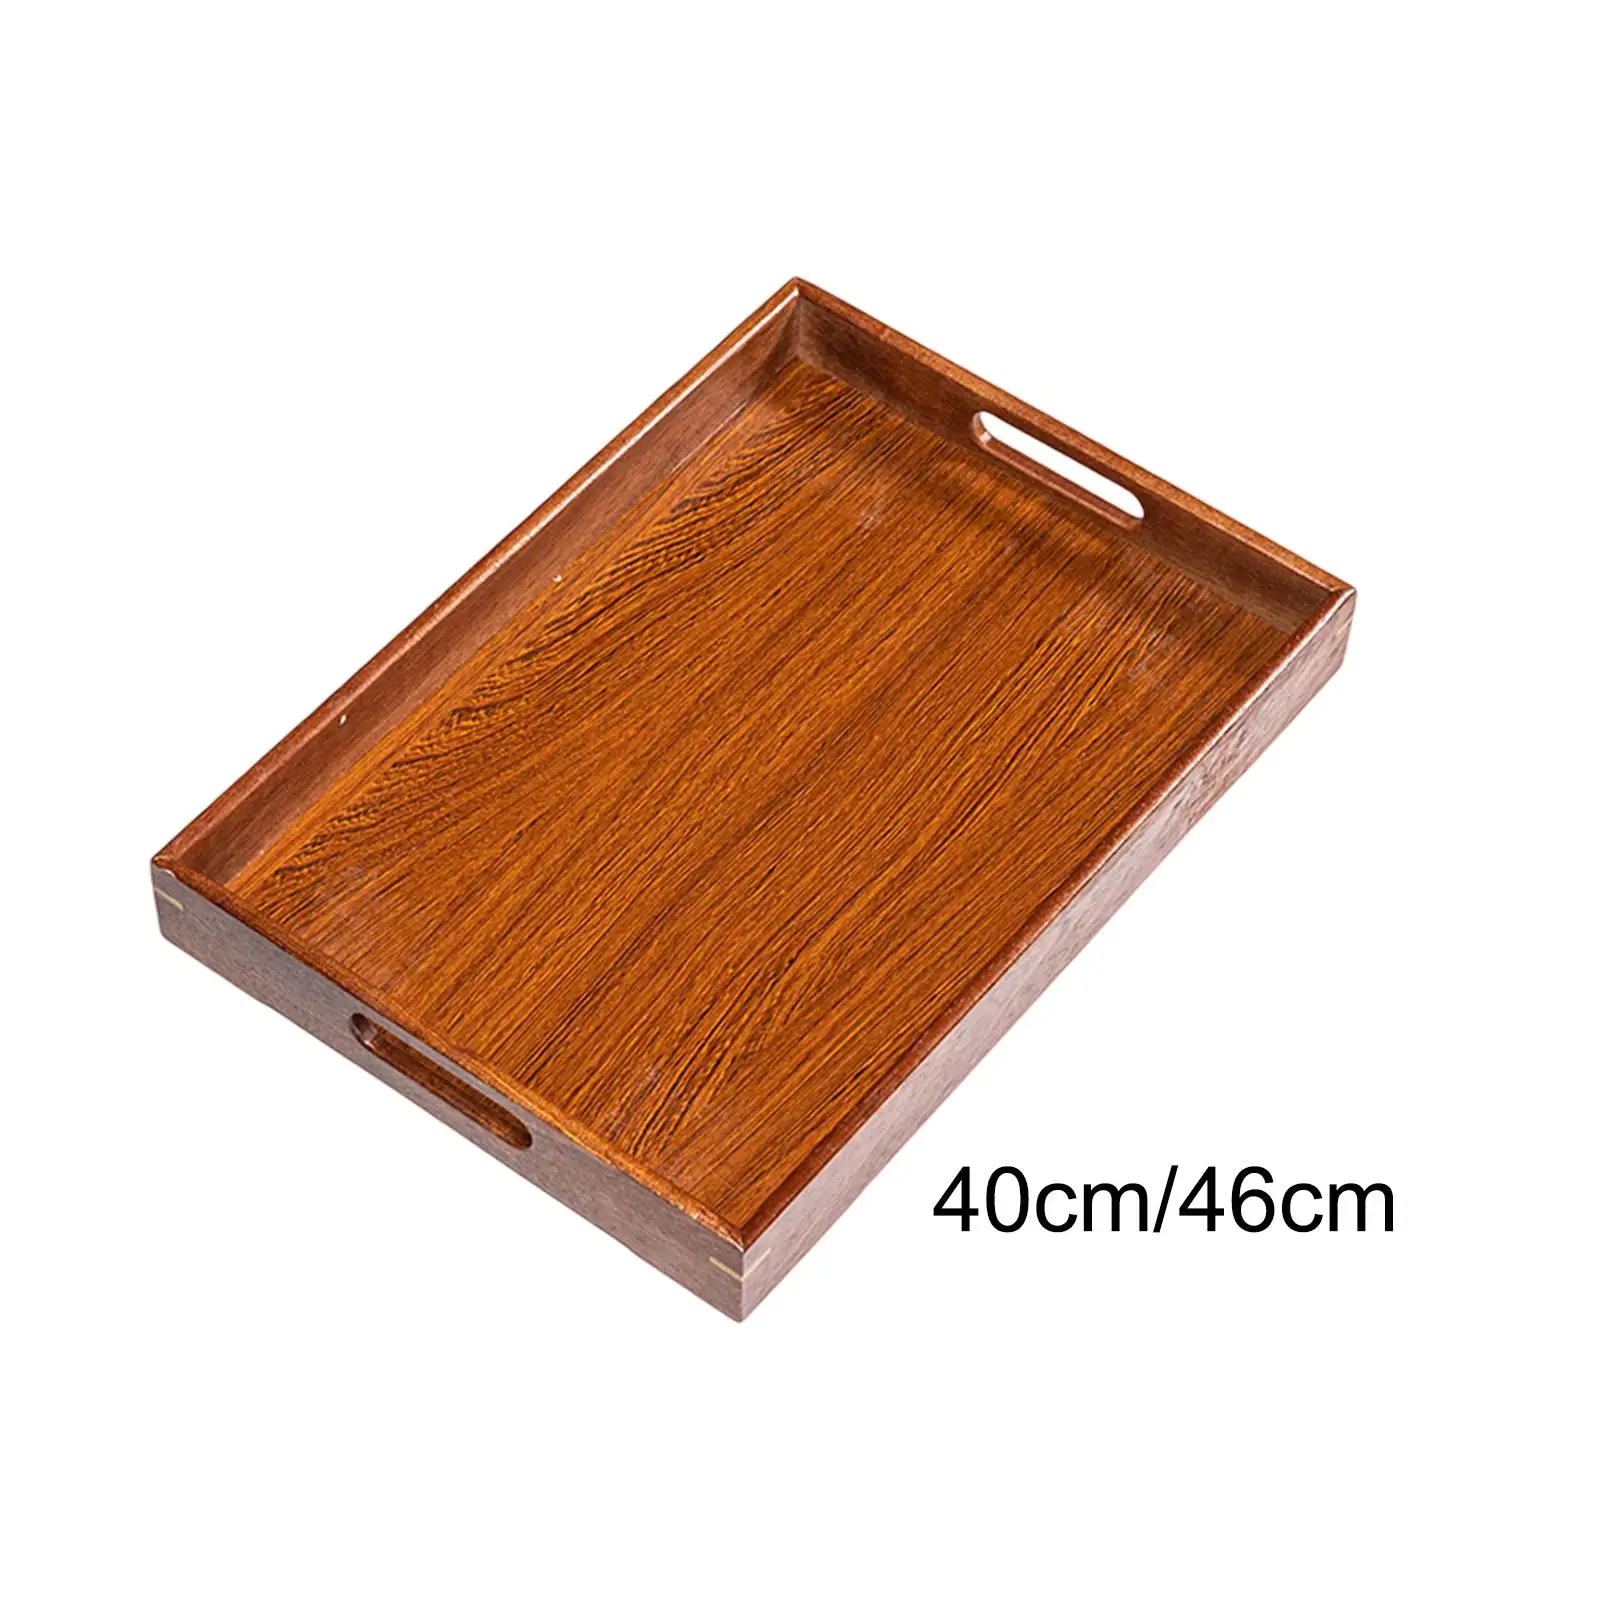 Serving Tray Wooden Serving Decorative Tray Serving Plate Dinner Trays